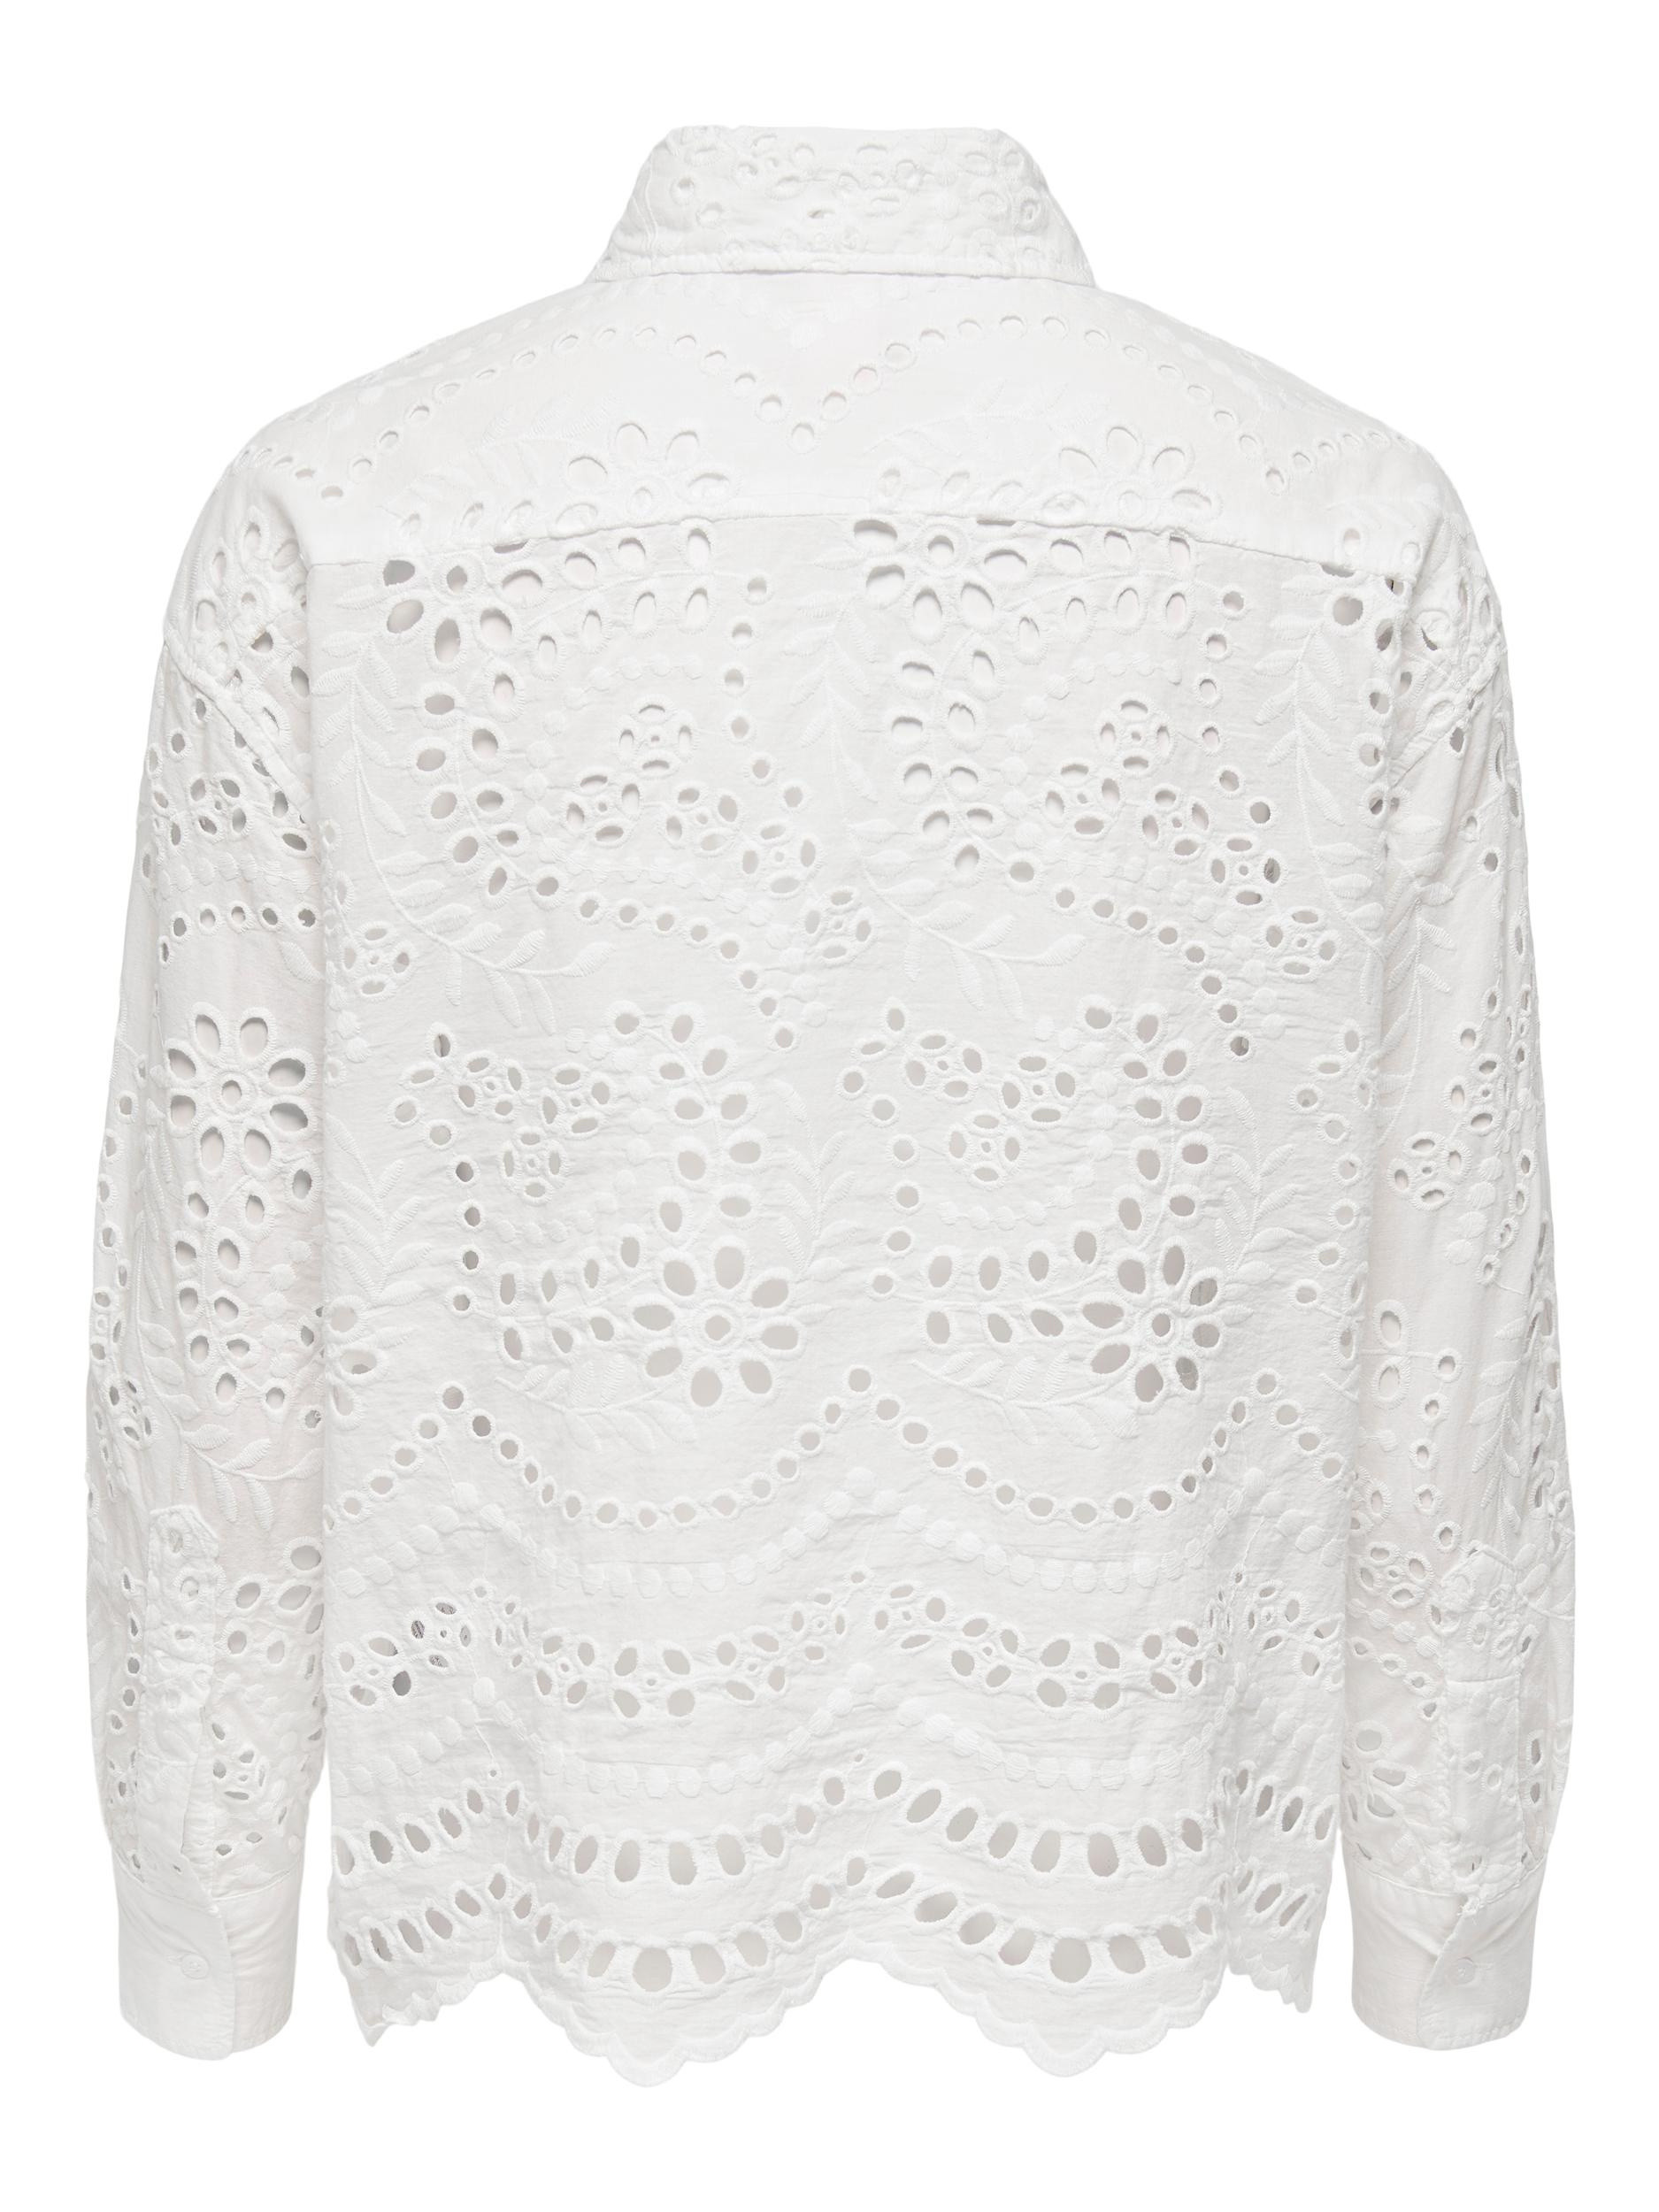 Only - Boxy fit lace shirt, White, large image number 1